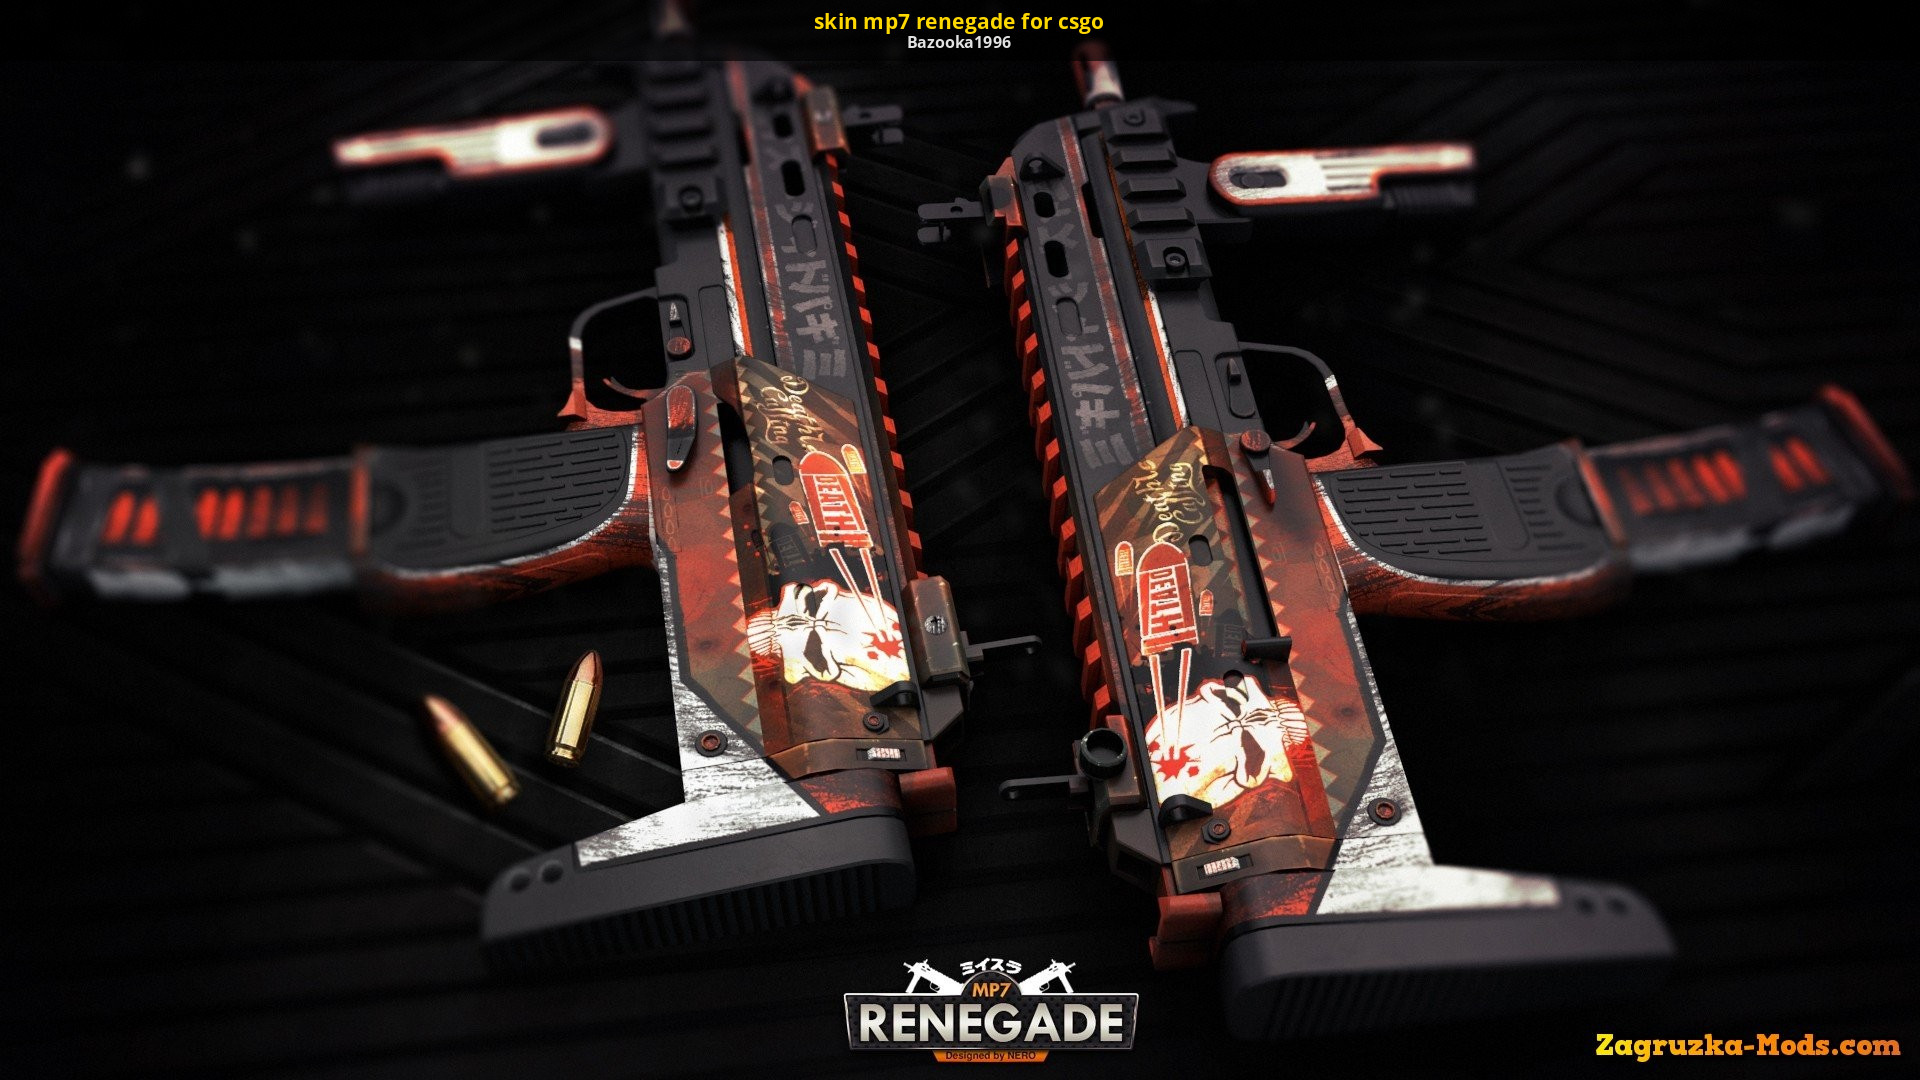 skin mp7 renegade for csgo [Counter-Strike: Global Offensive] [Mods]